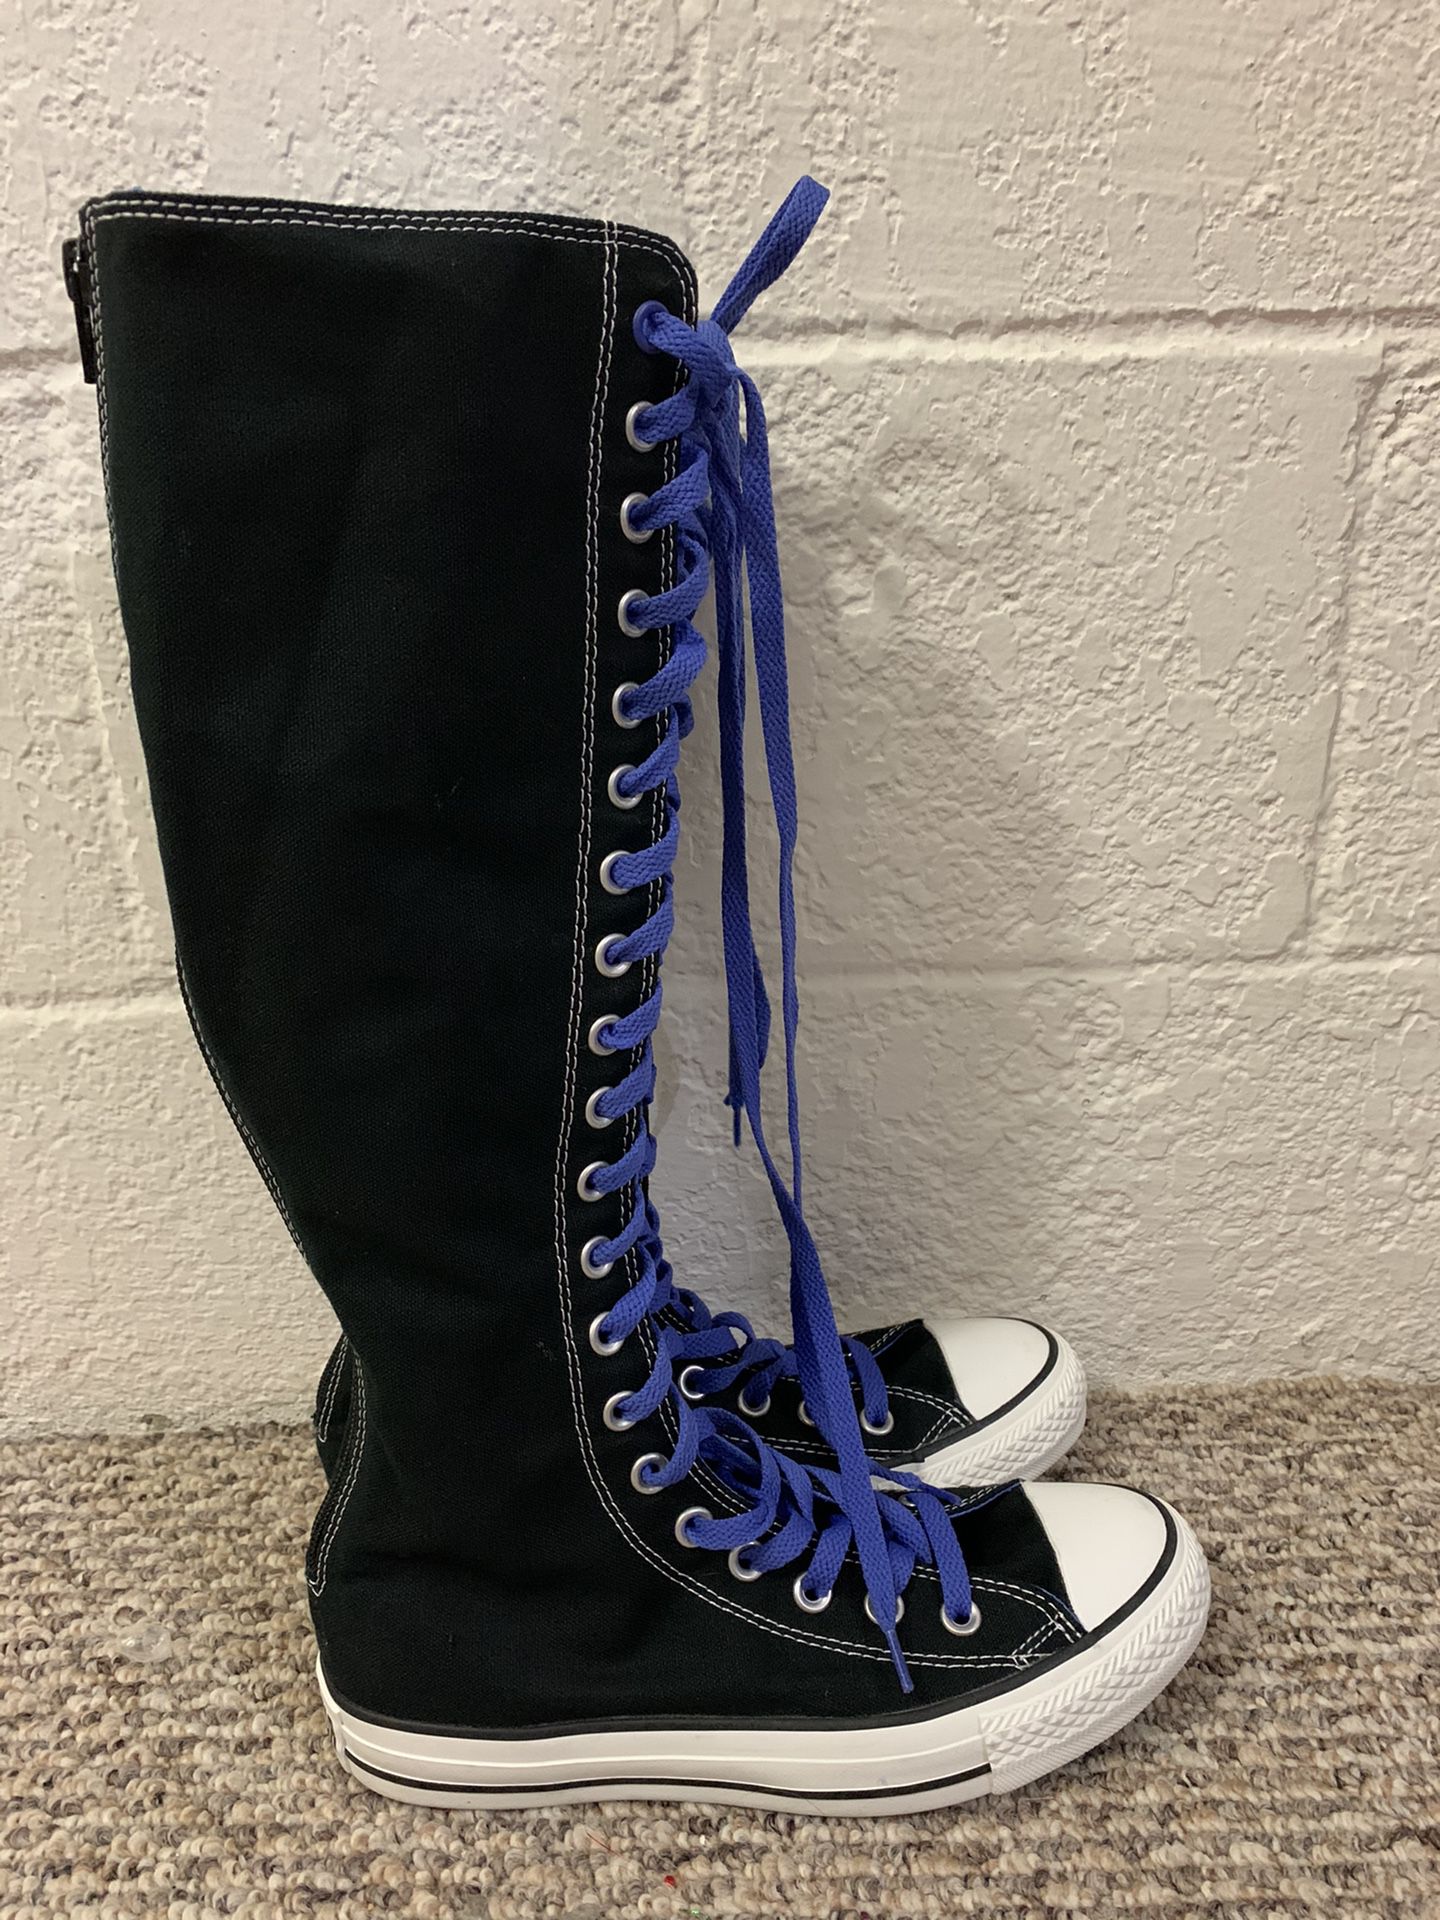 New Without box Black / Bluish Purple Knee High Converse for Sale in Los  Angeles, CA - OfferUp